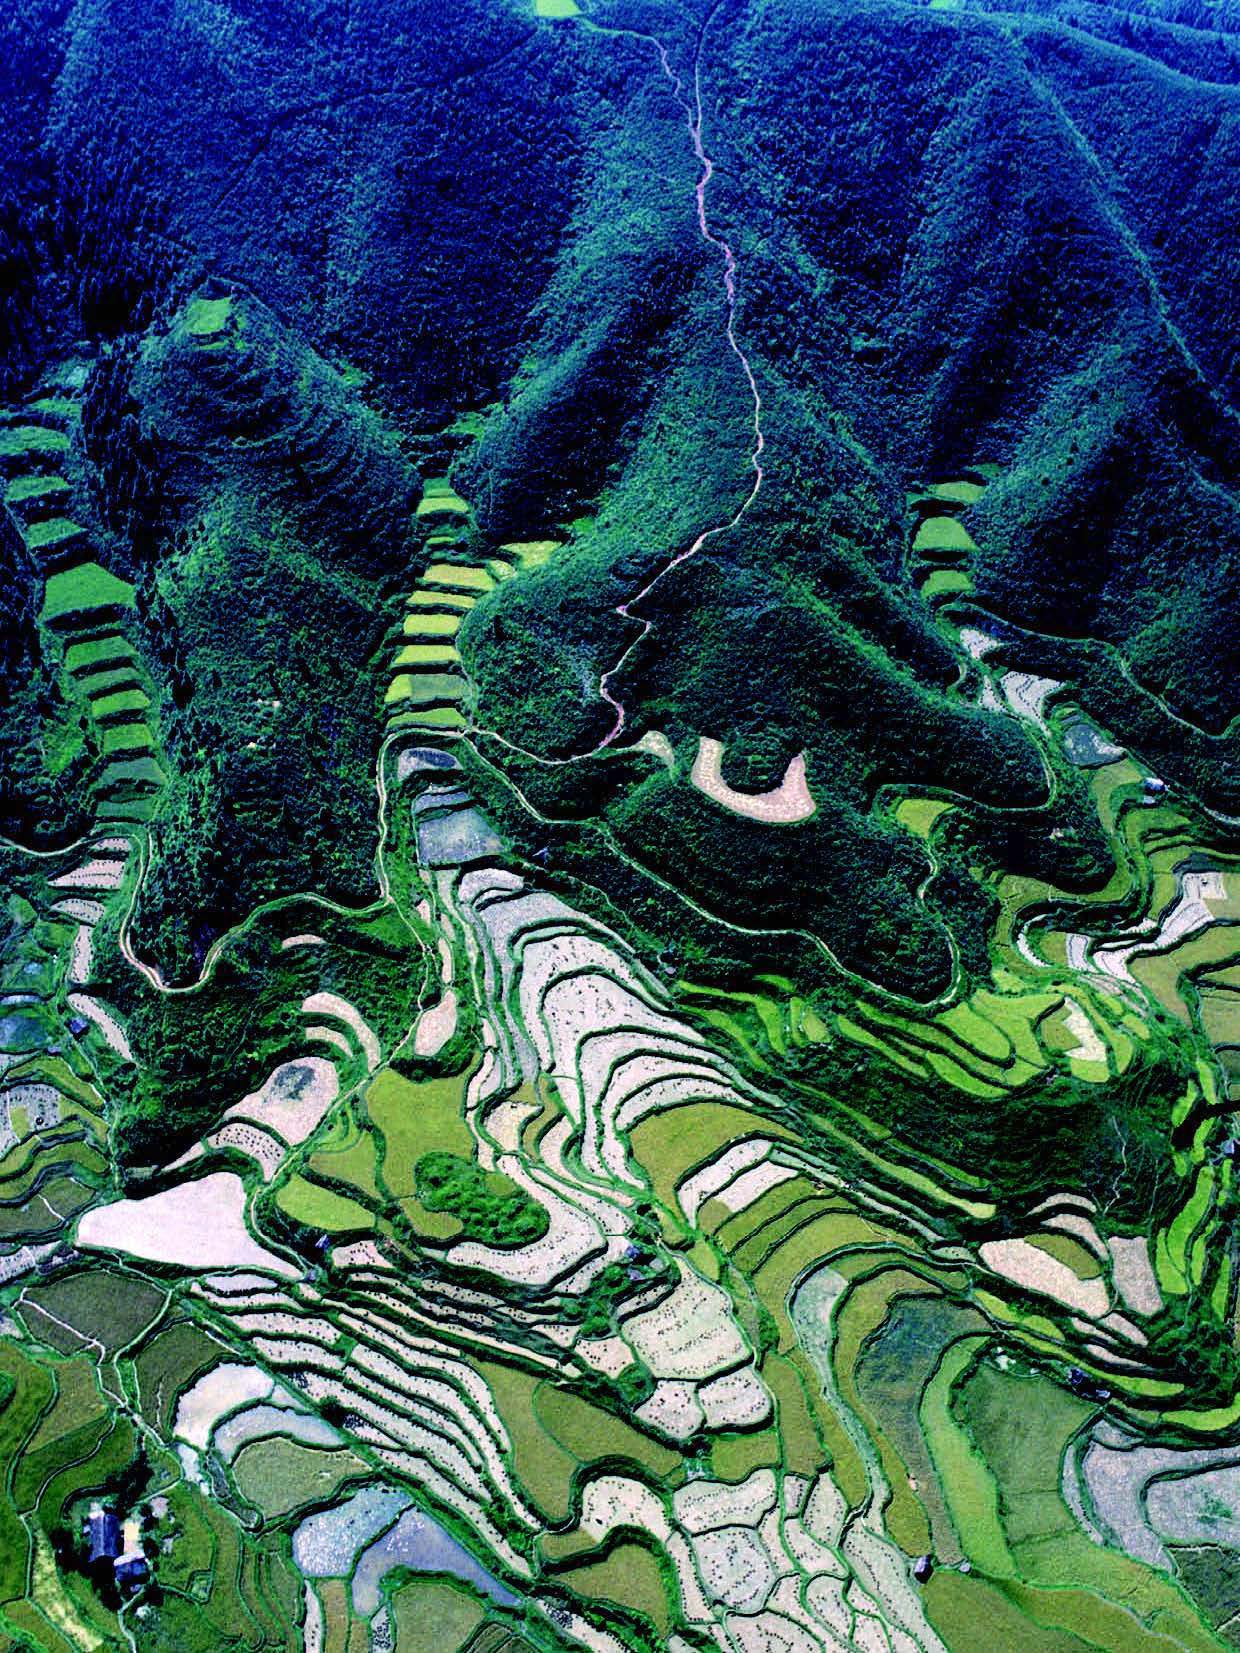 Ancient agricultural terraces have grown food for millennia